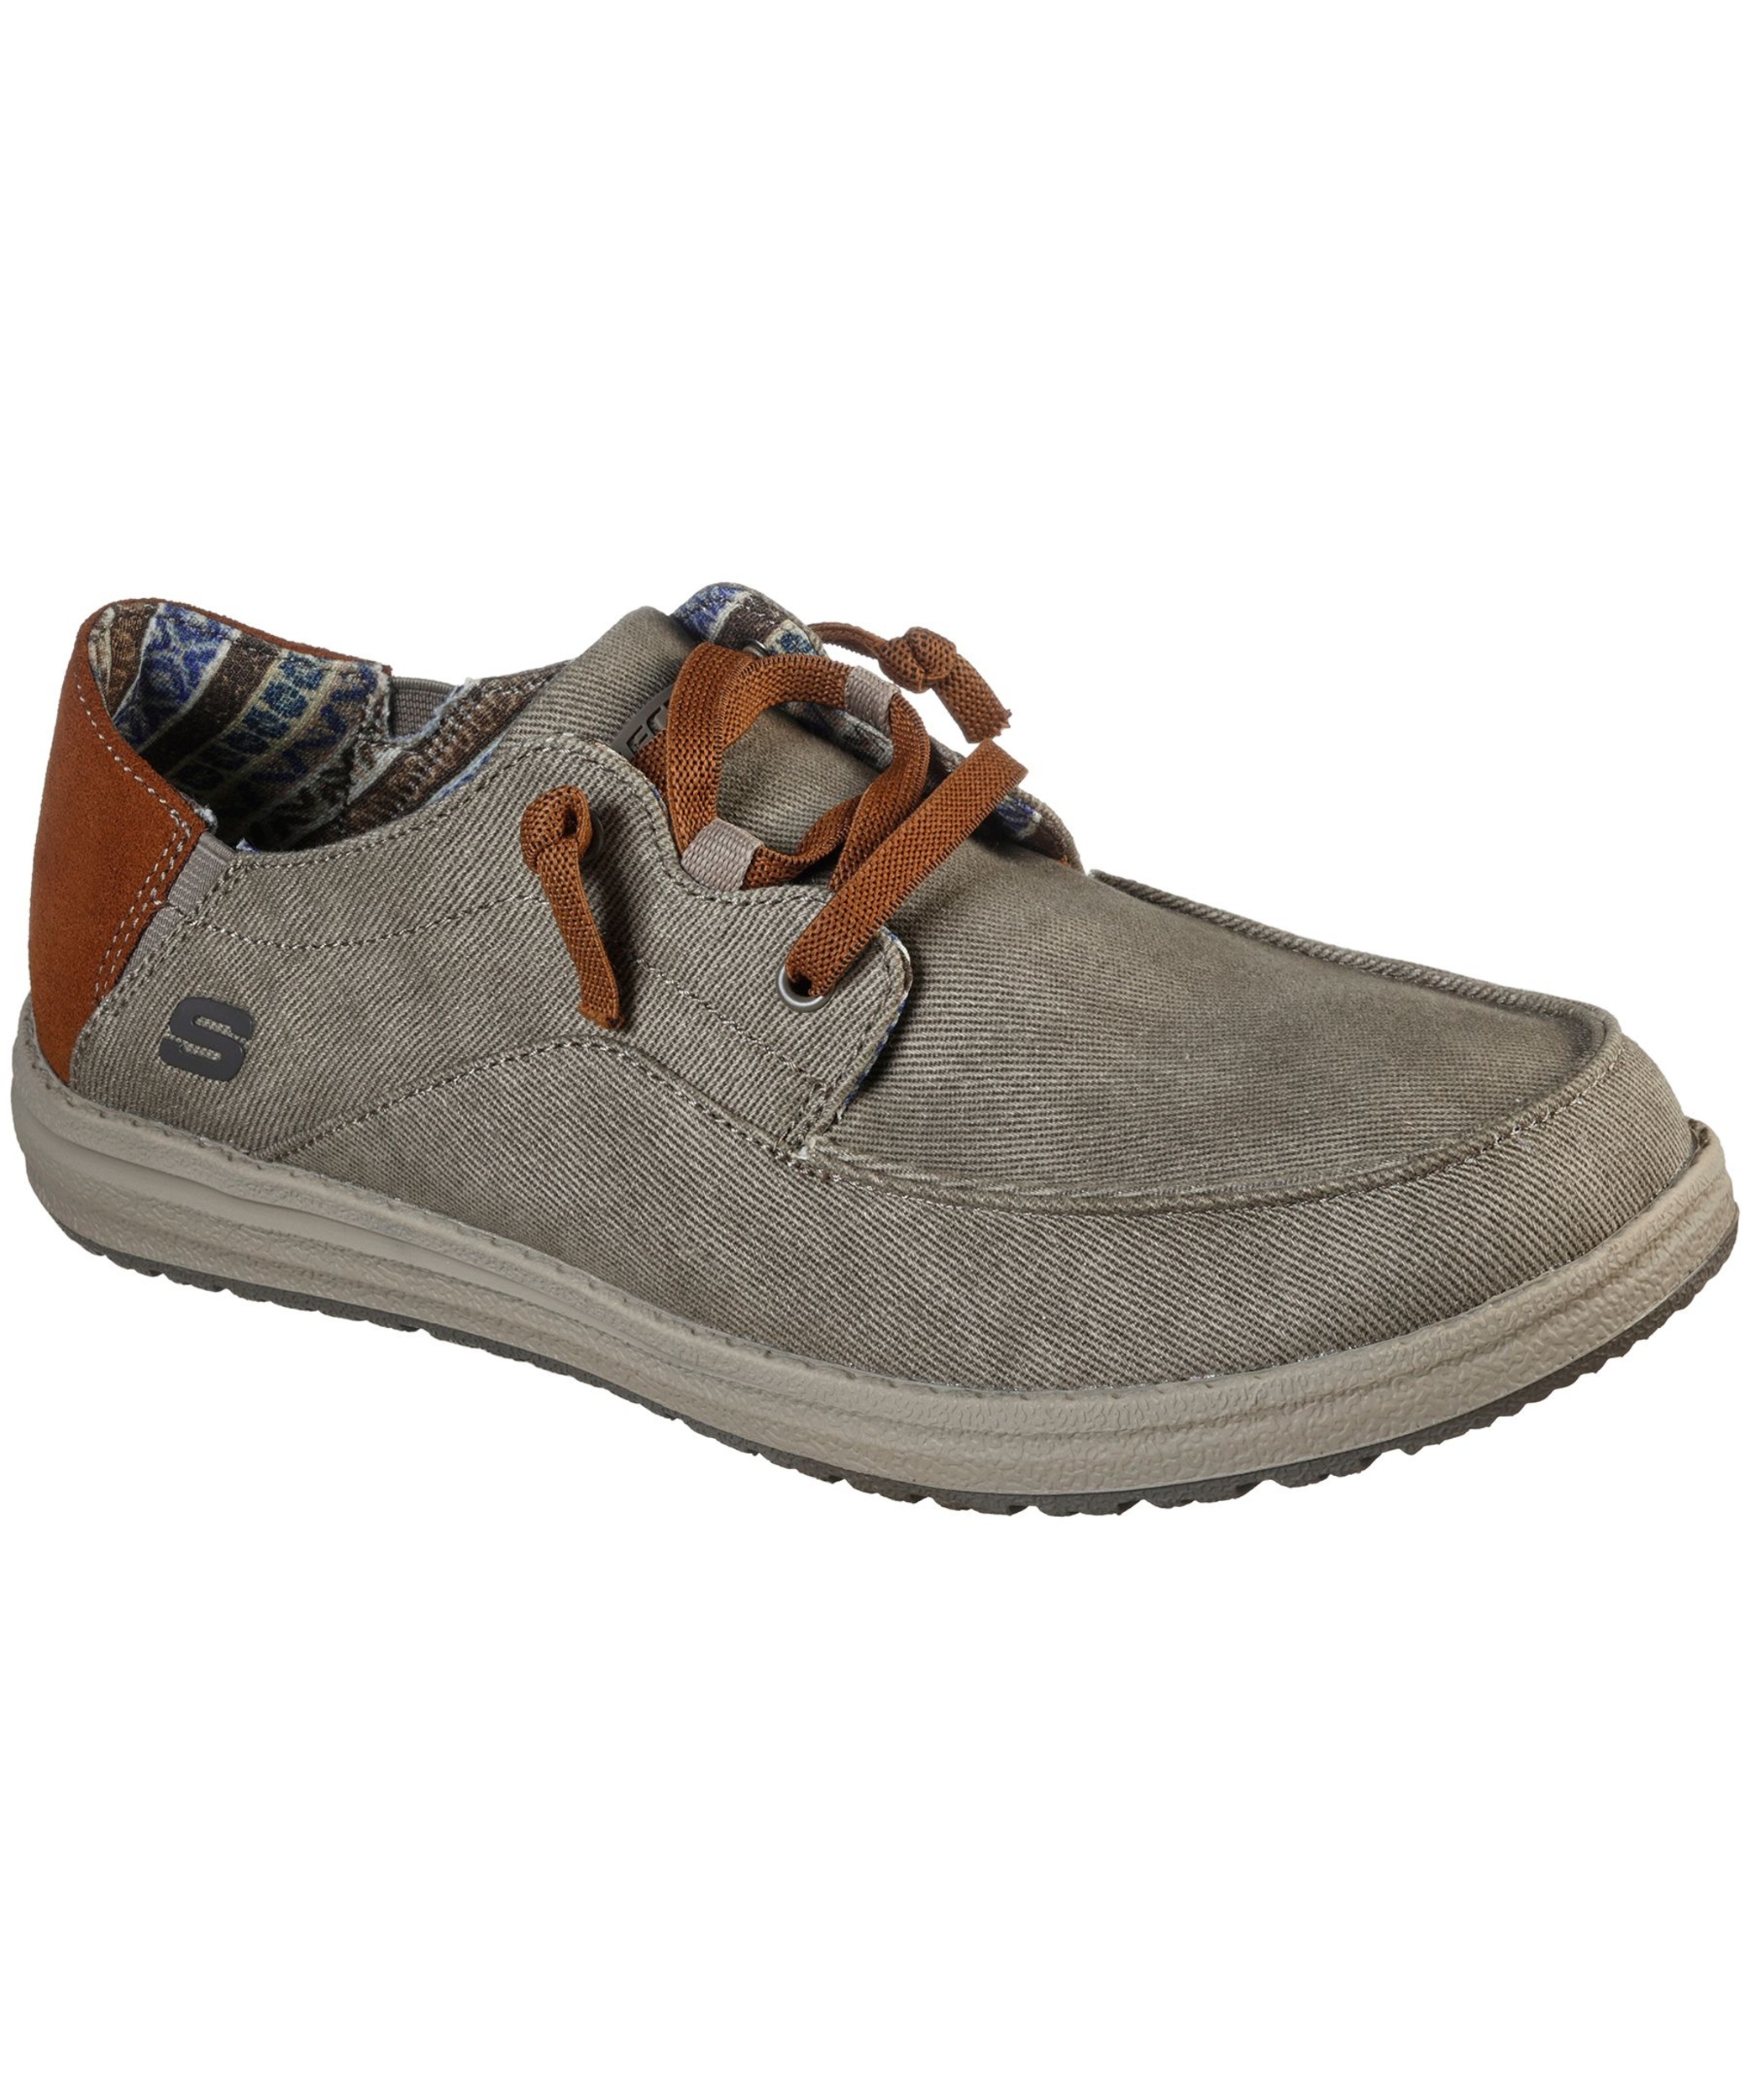 Skechers Men's Melson-Planon Relaxed Fit Slip-On Shoes - Taupe | Marks